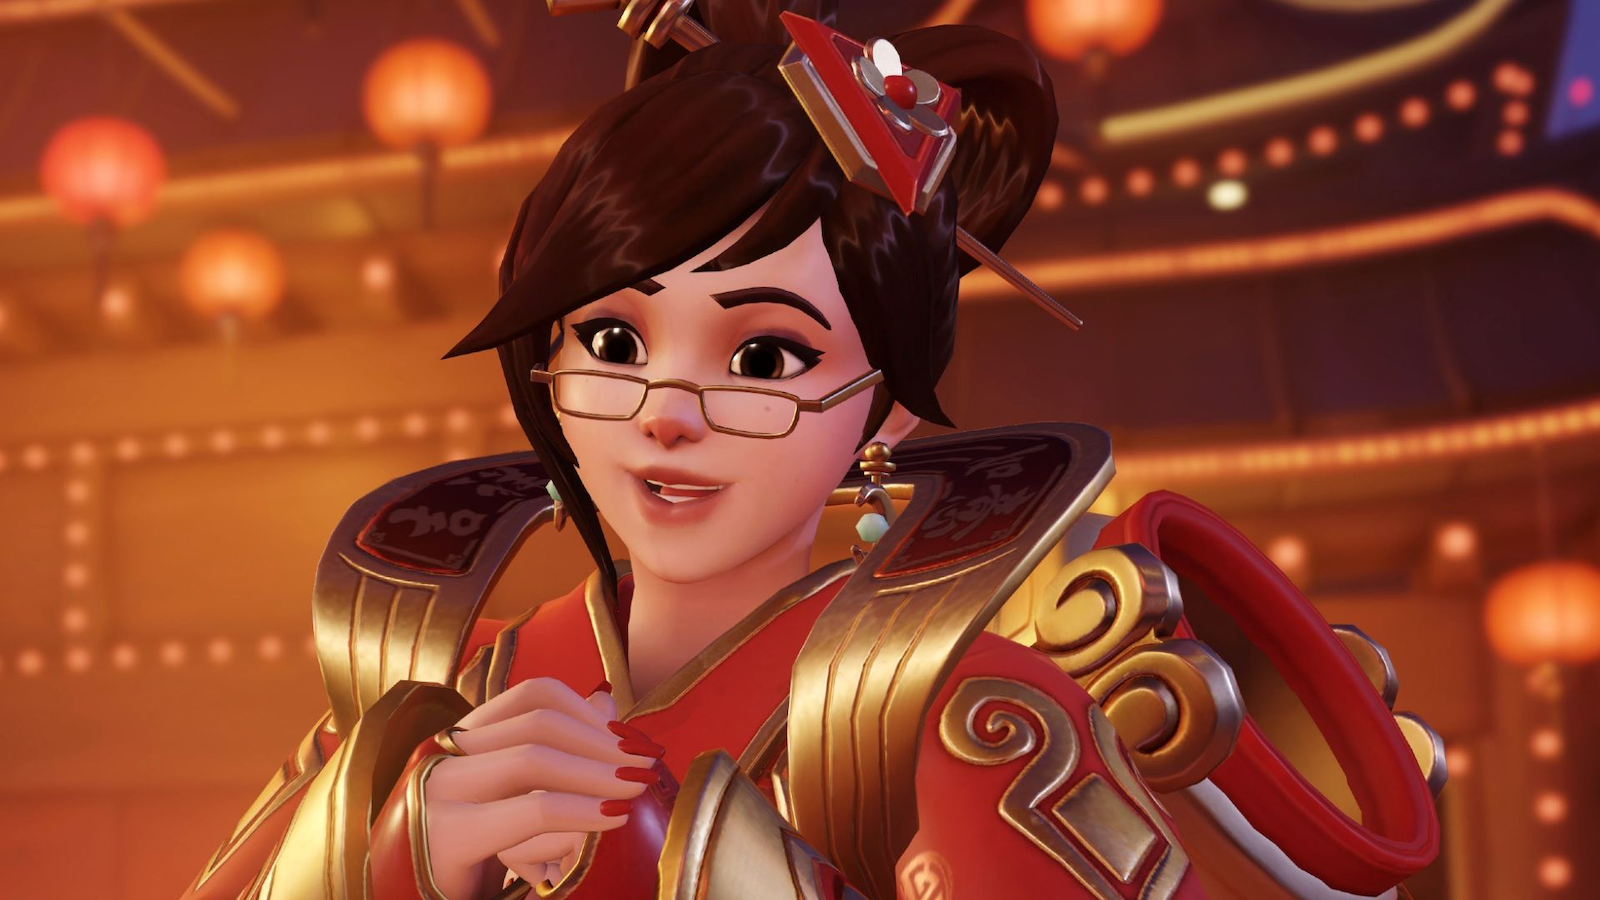 Overwatch 2 major leak shows Mythic skin that might be coming with Season 3 battle pass - Dot Esports